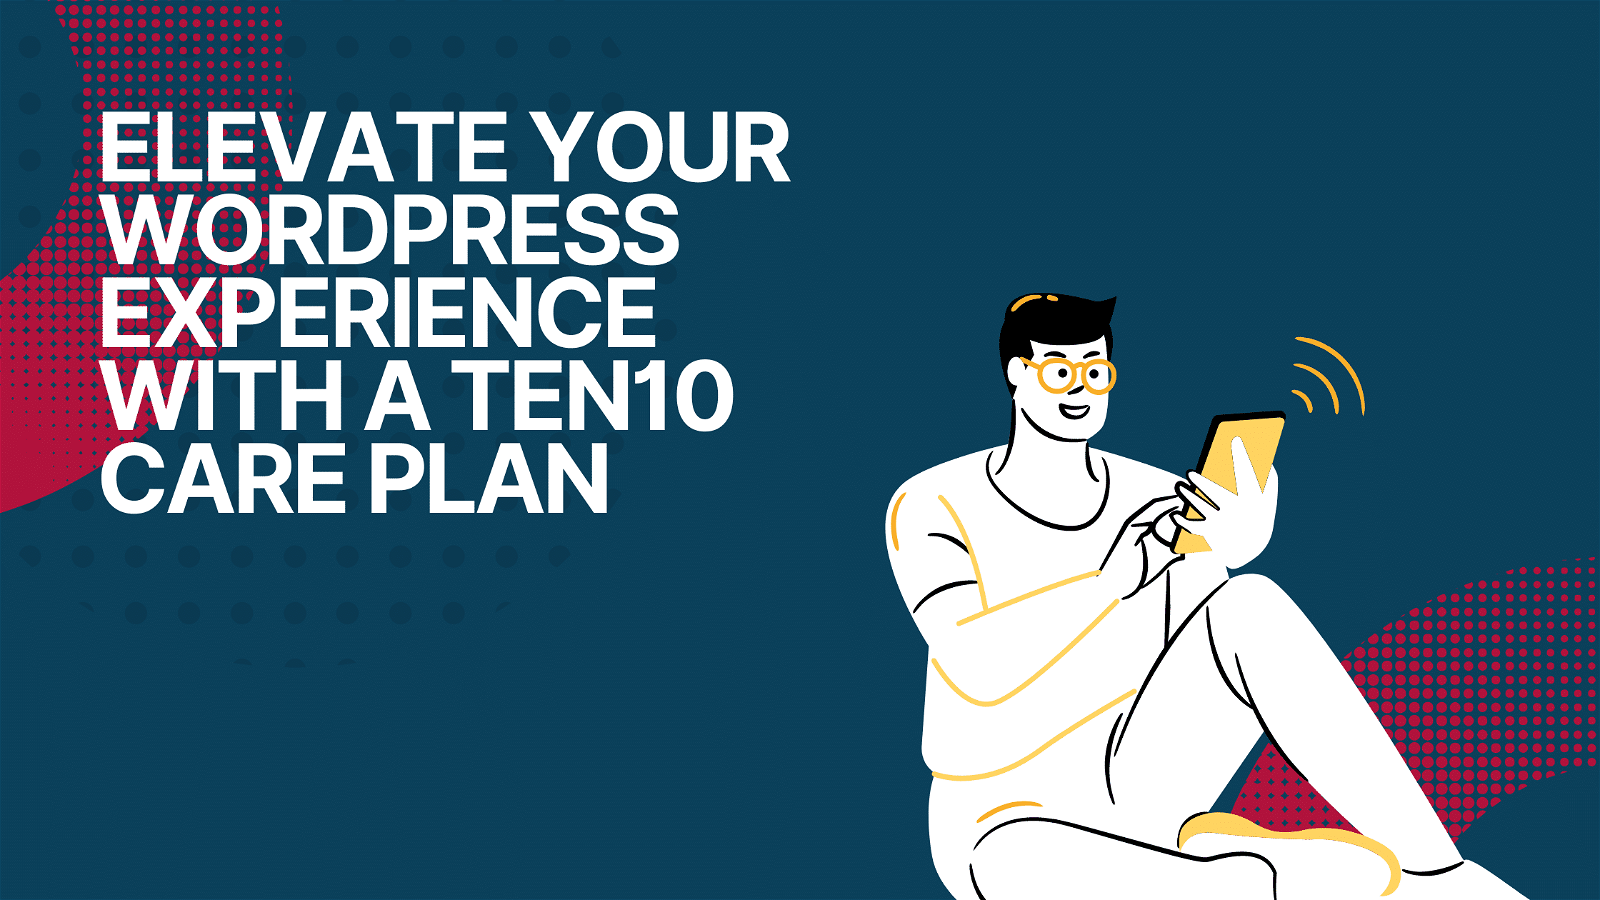 This image is promoting a WordPress Care Plan from Ten10 that will help users enhance their WordPress experience.